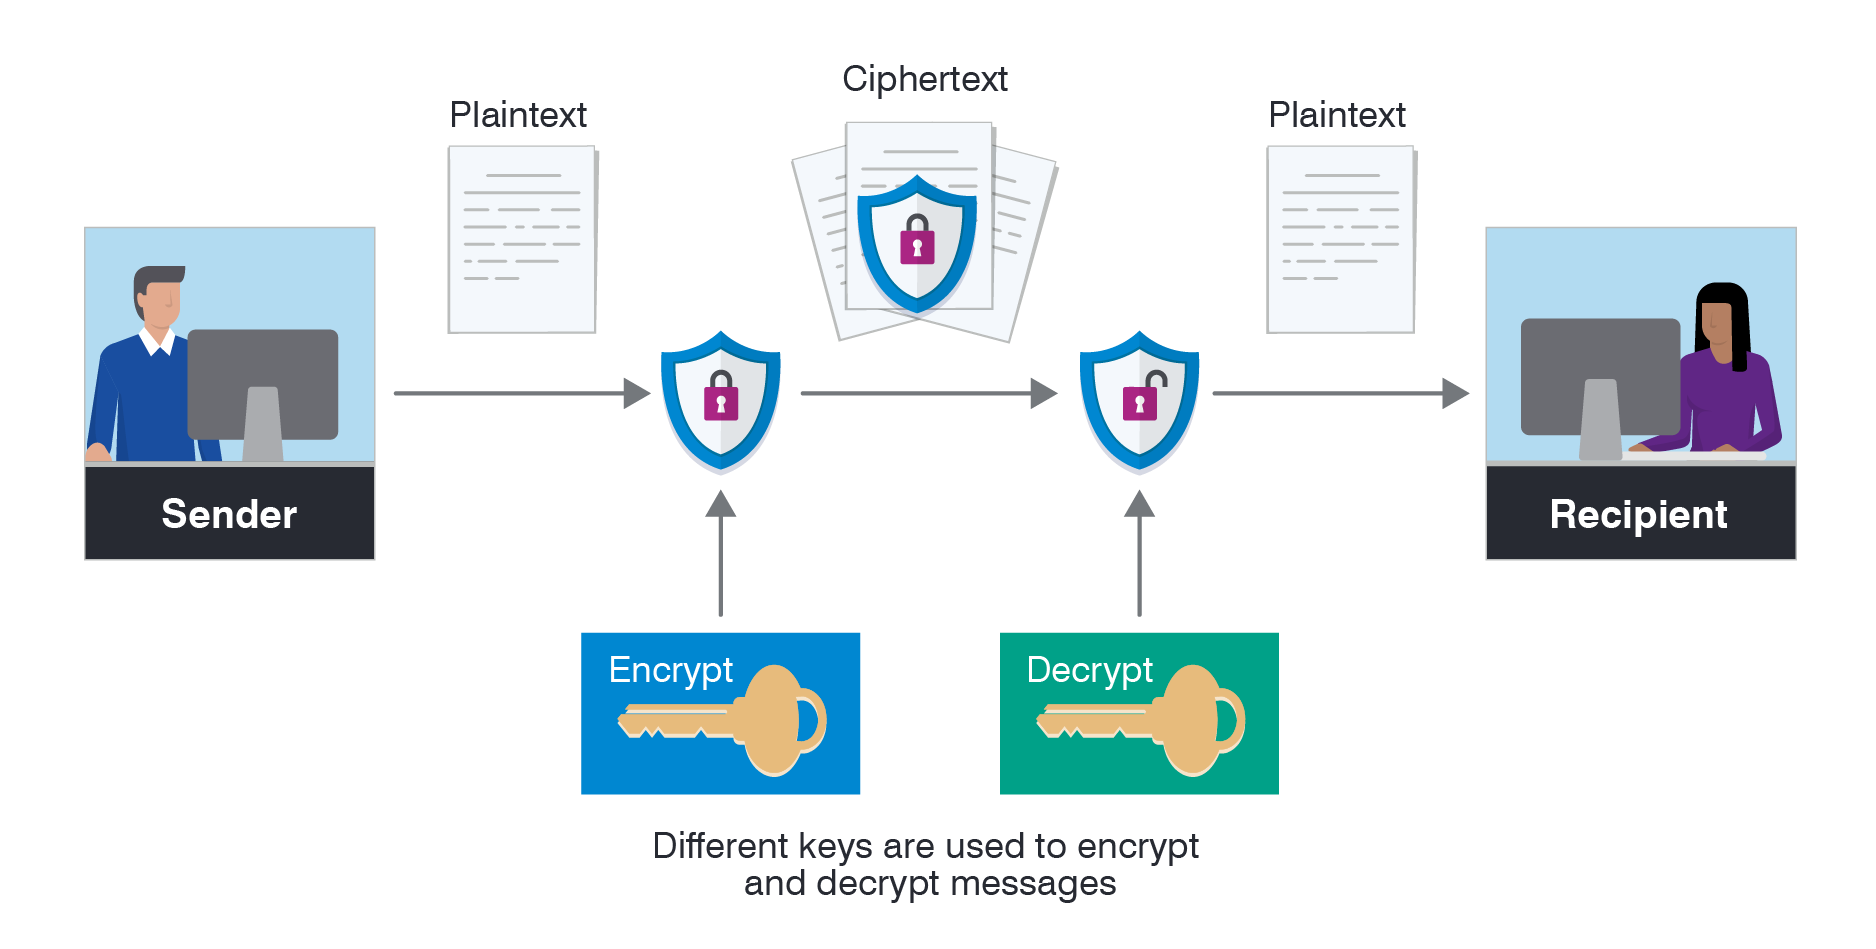 What Is Encryption? - Definition, Types & More